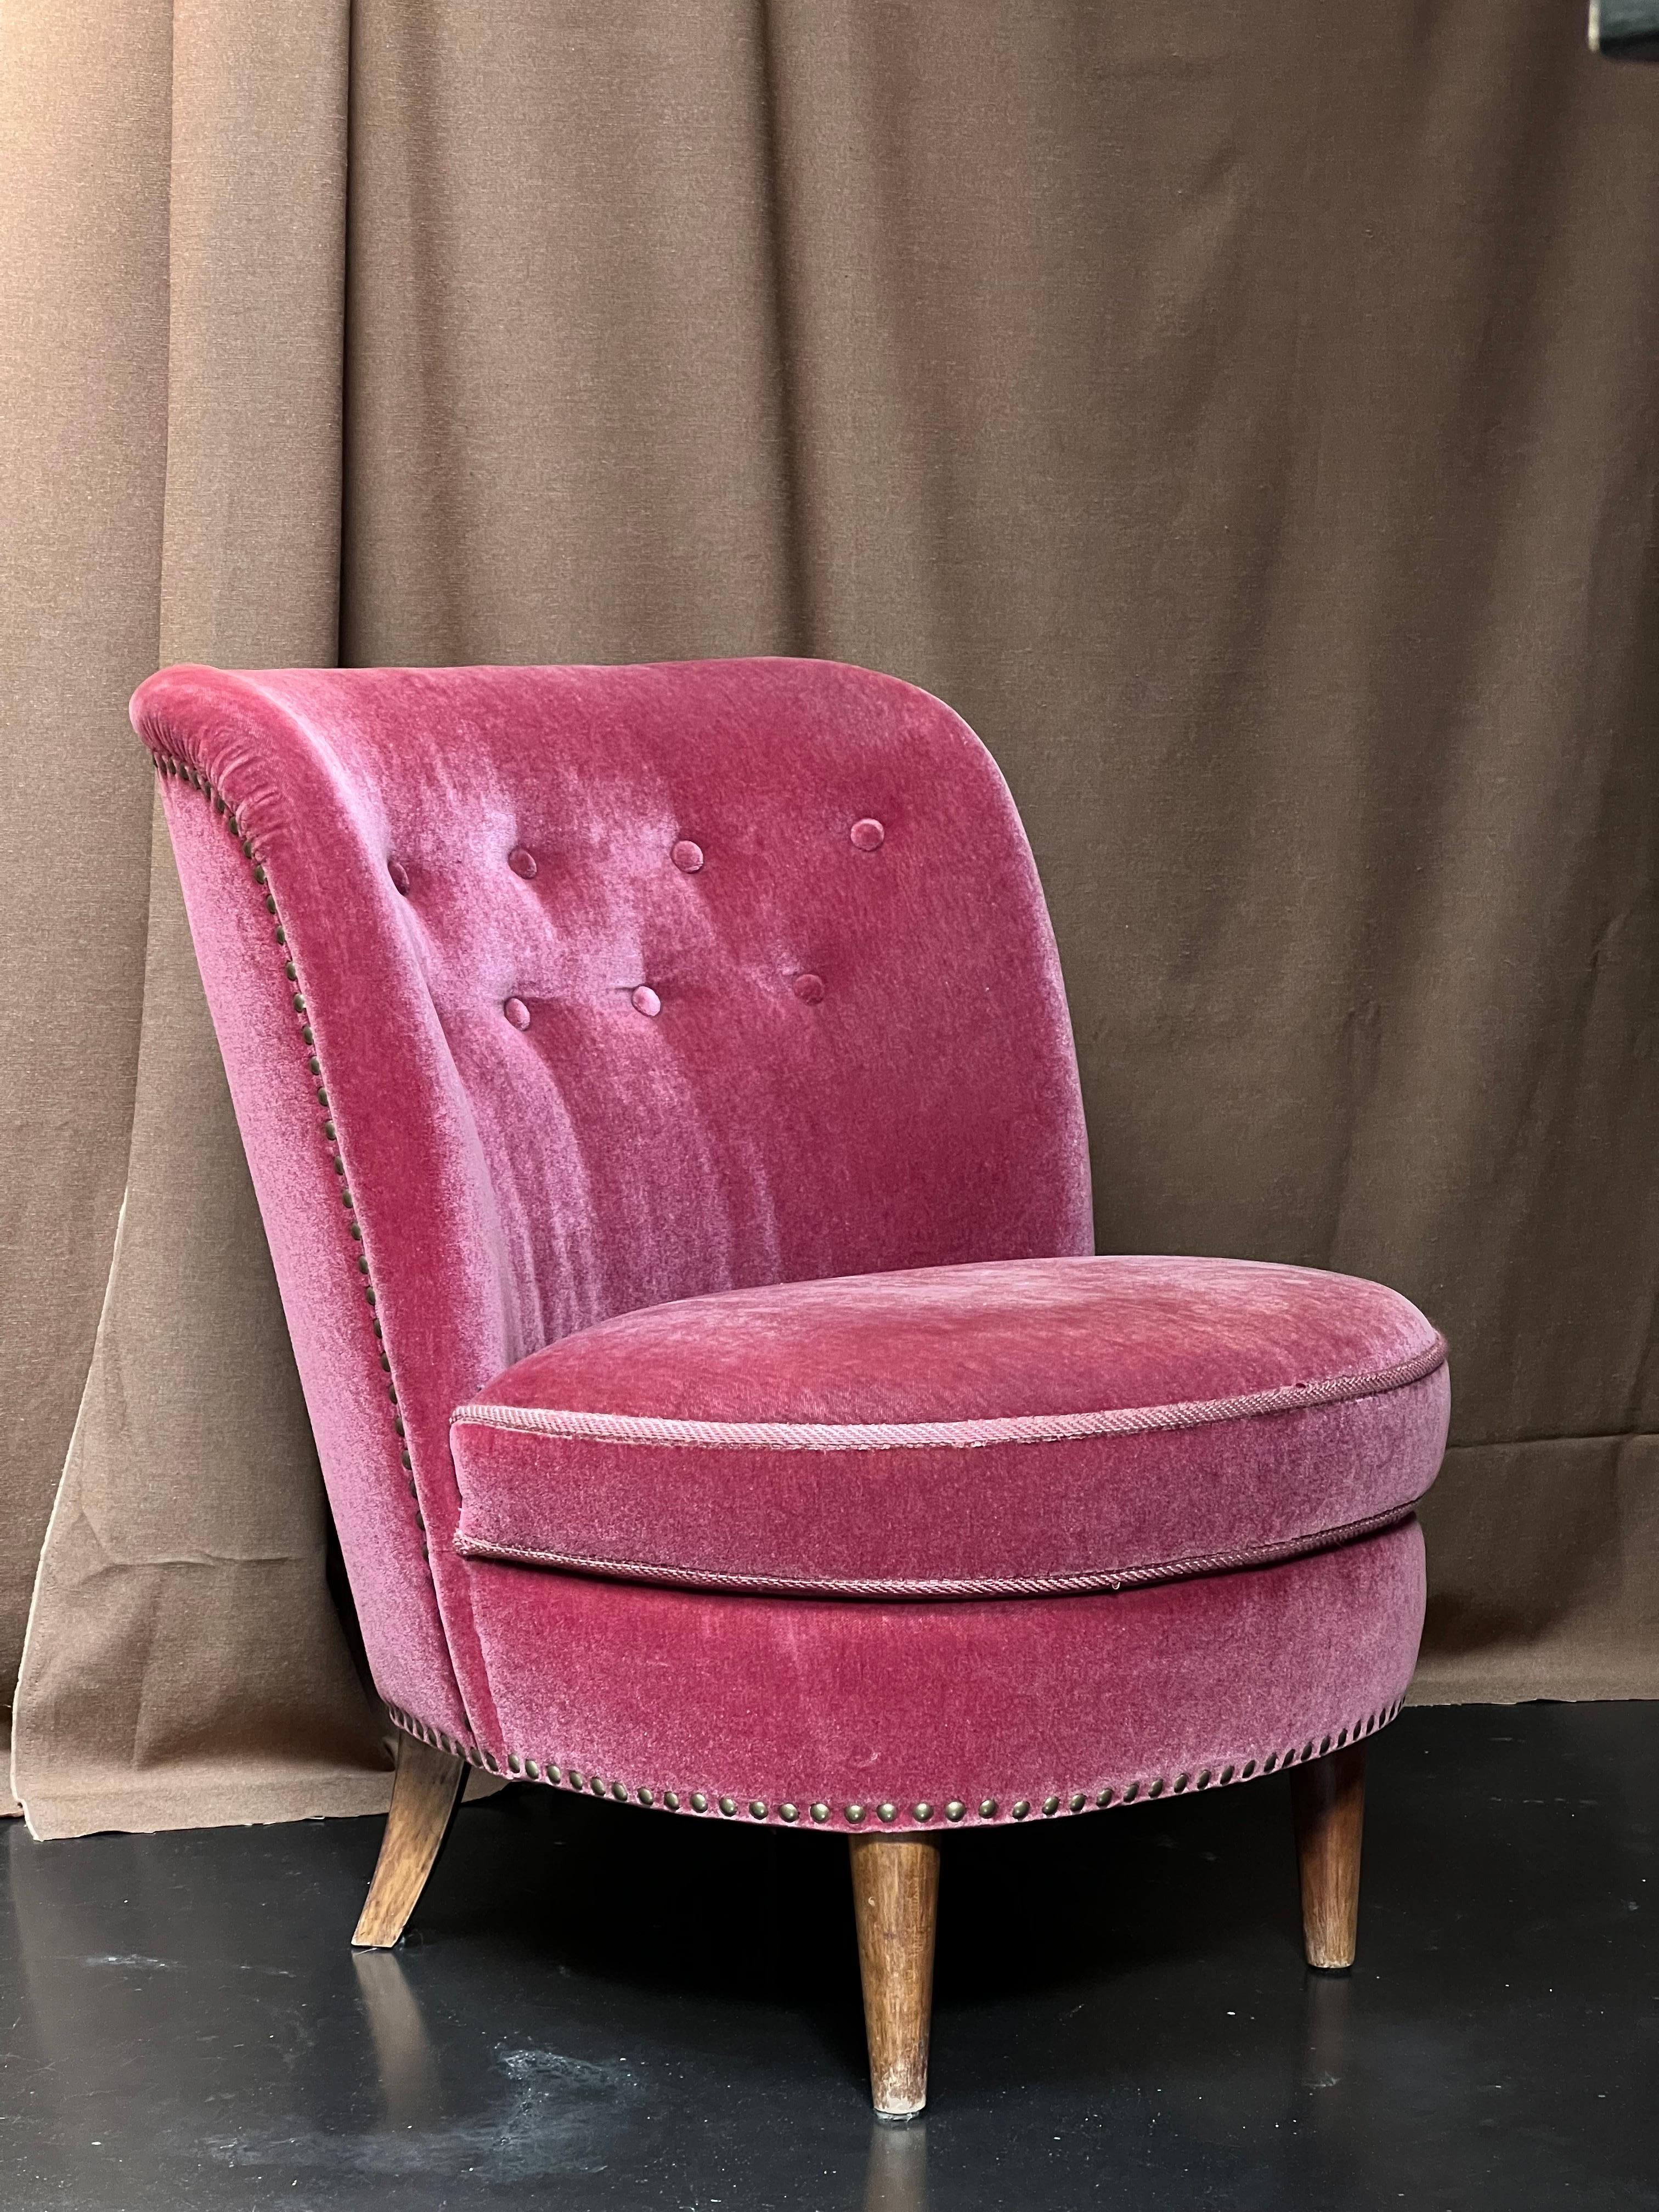 Swedish Grace Pink Mohair and Brass Nails Chauffeuse, Sweden, 1930s For Sale 1